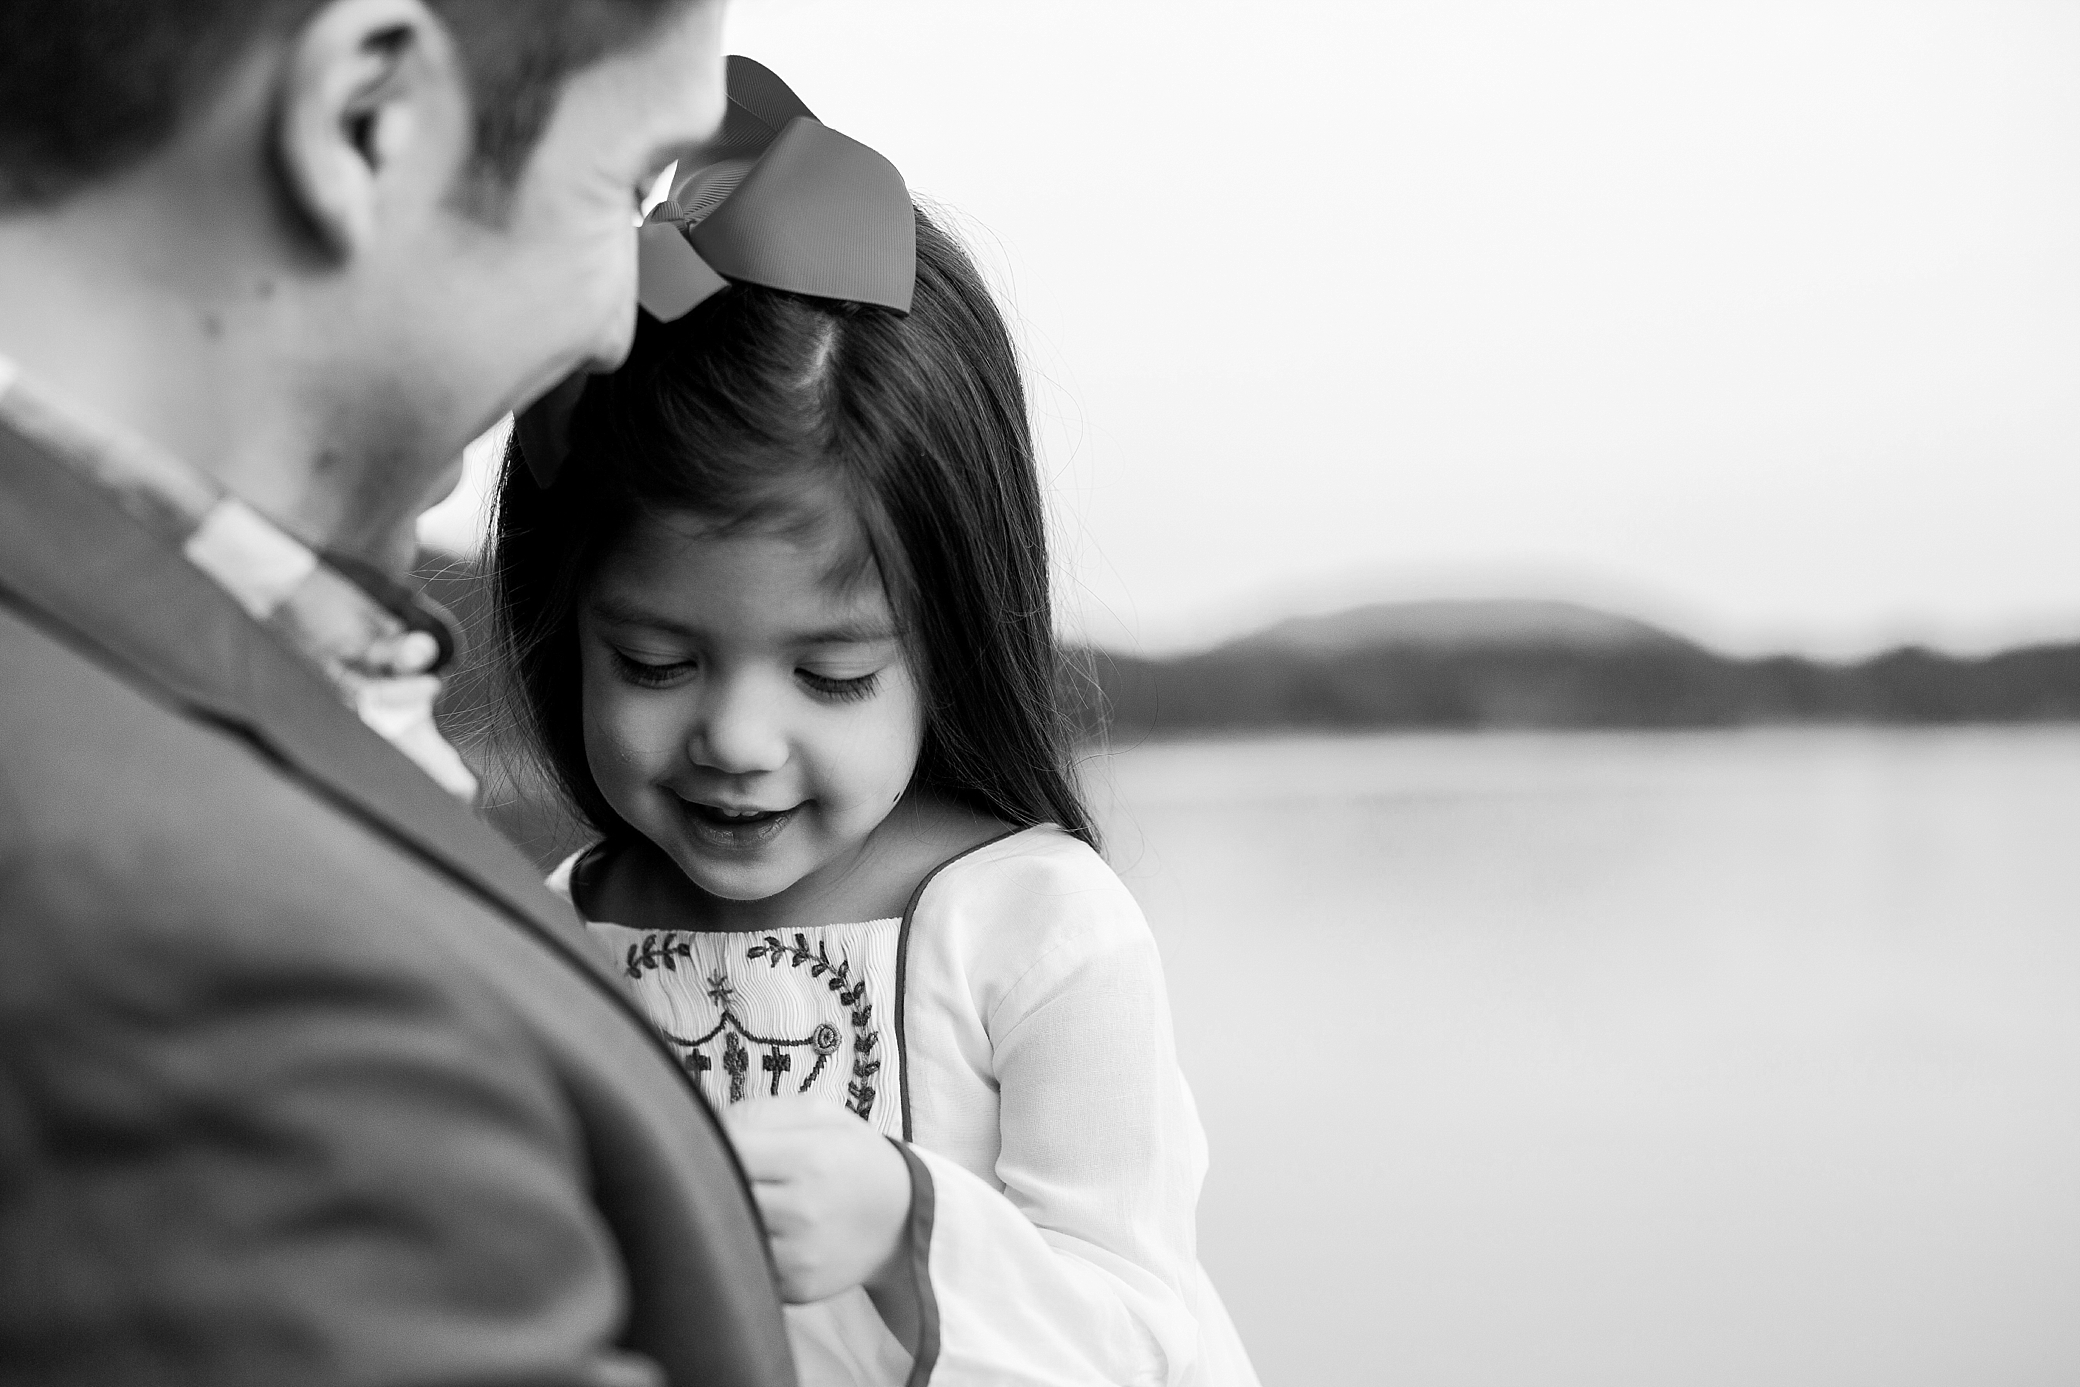 Daddy daughter moment during family photoshoot | Megan Montalvo Photography